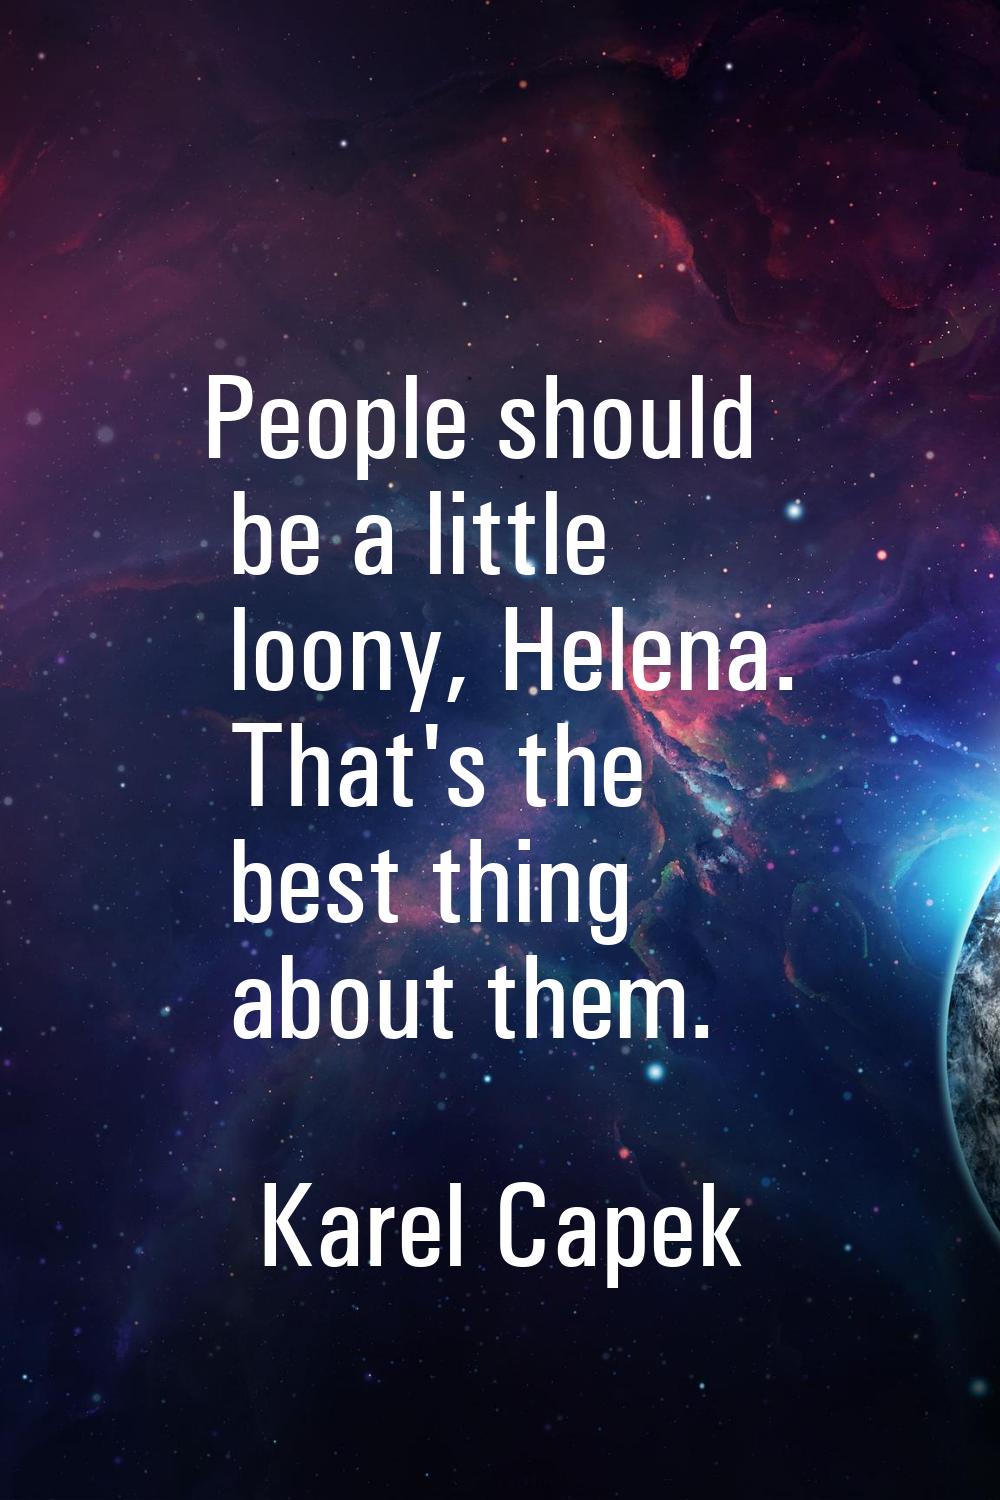 People should be a little loony, Helena. That's the best thing about them.